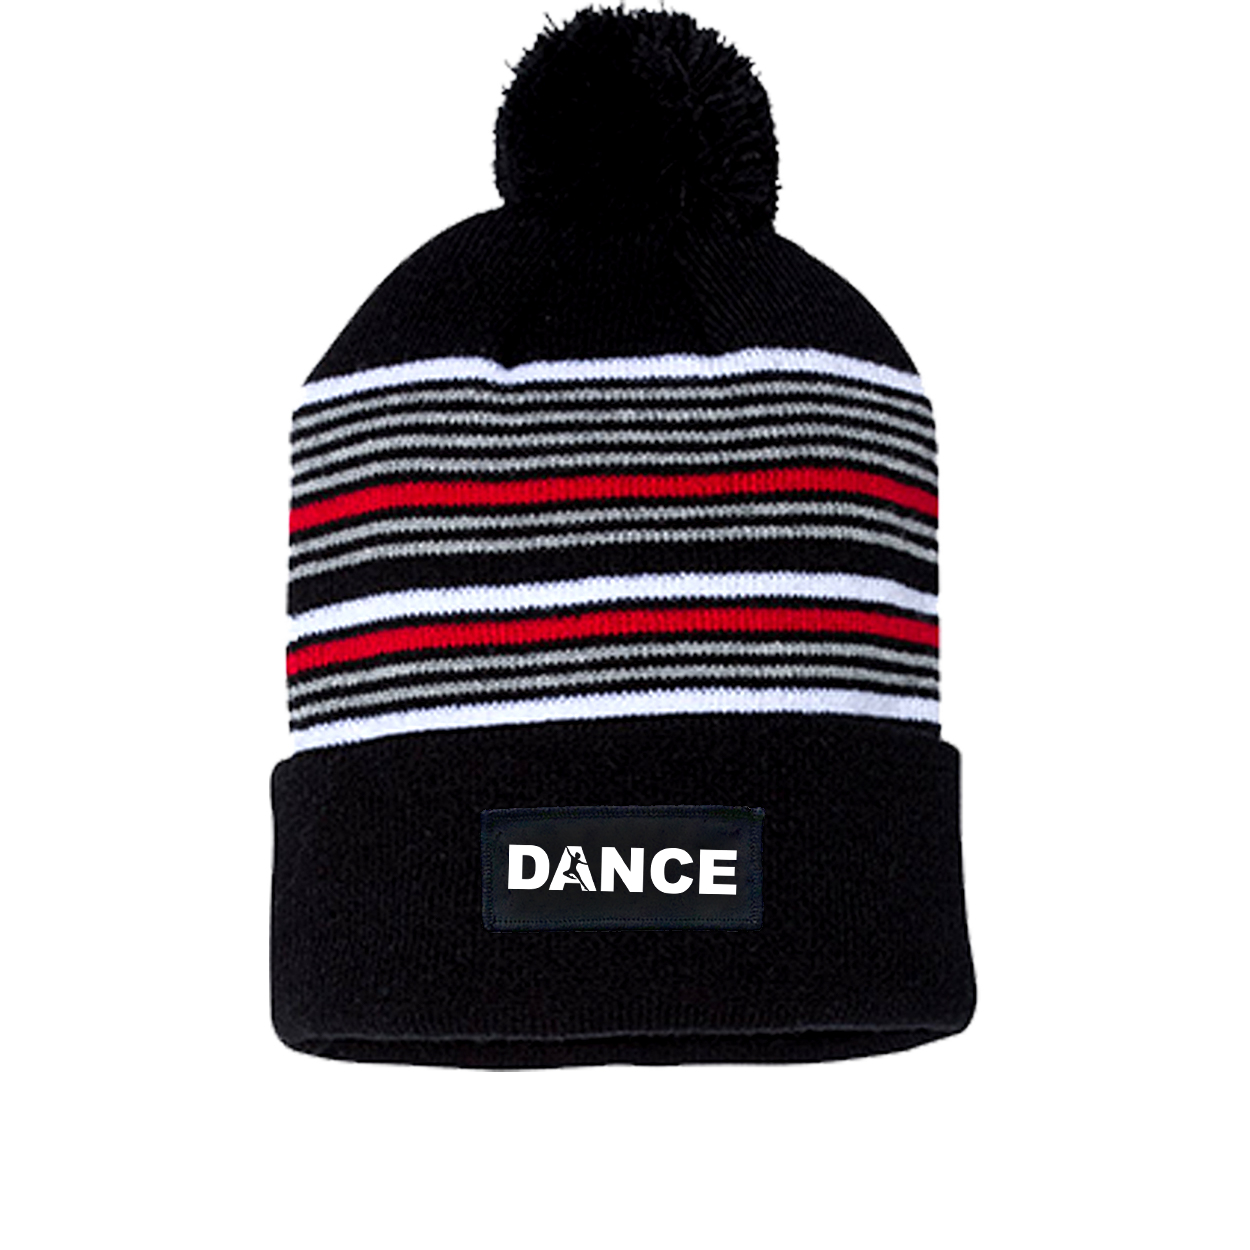 Dance Silhouette Logo Night Out Woven Patch Roll Up Pom Knit Beanie Black/ White/ Grey/ Red Beanie (White Logo)